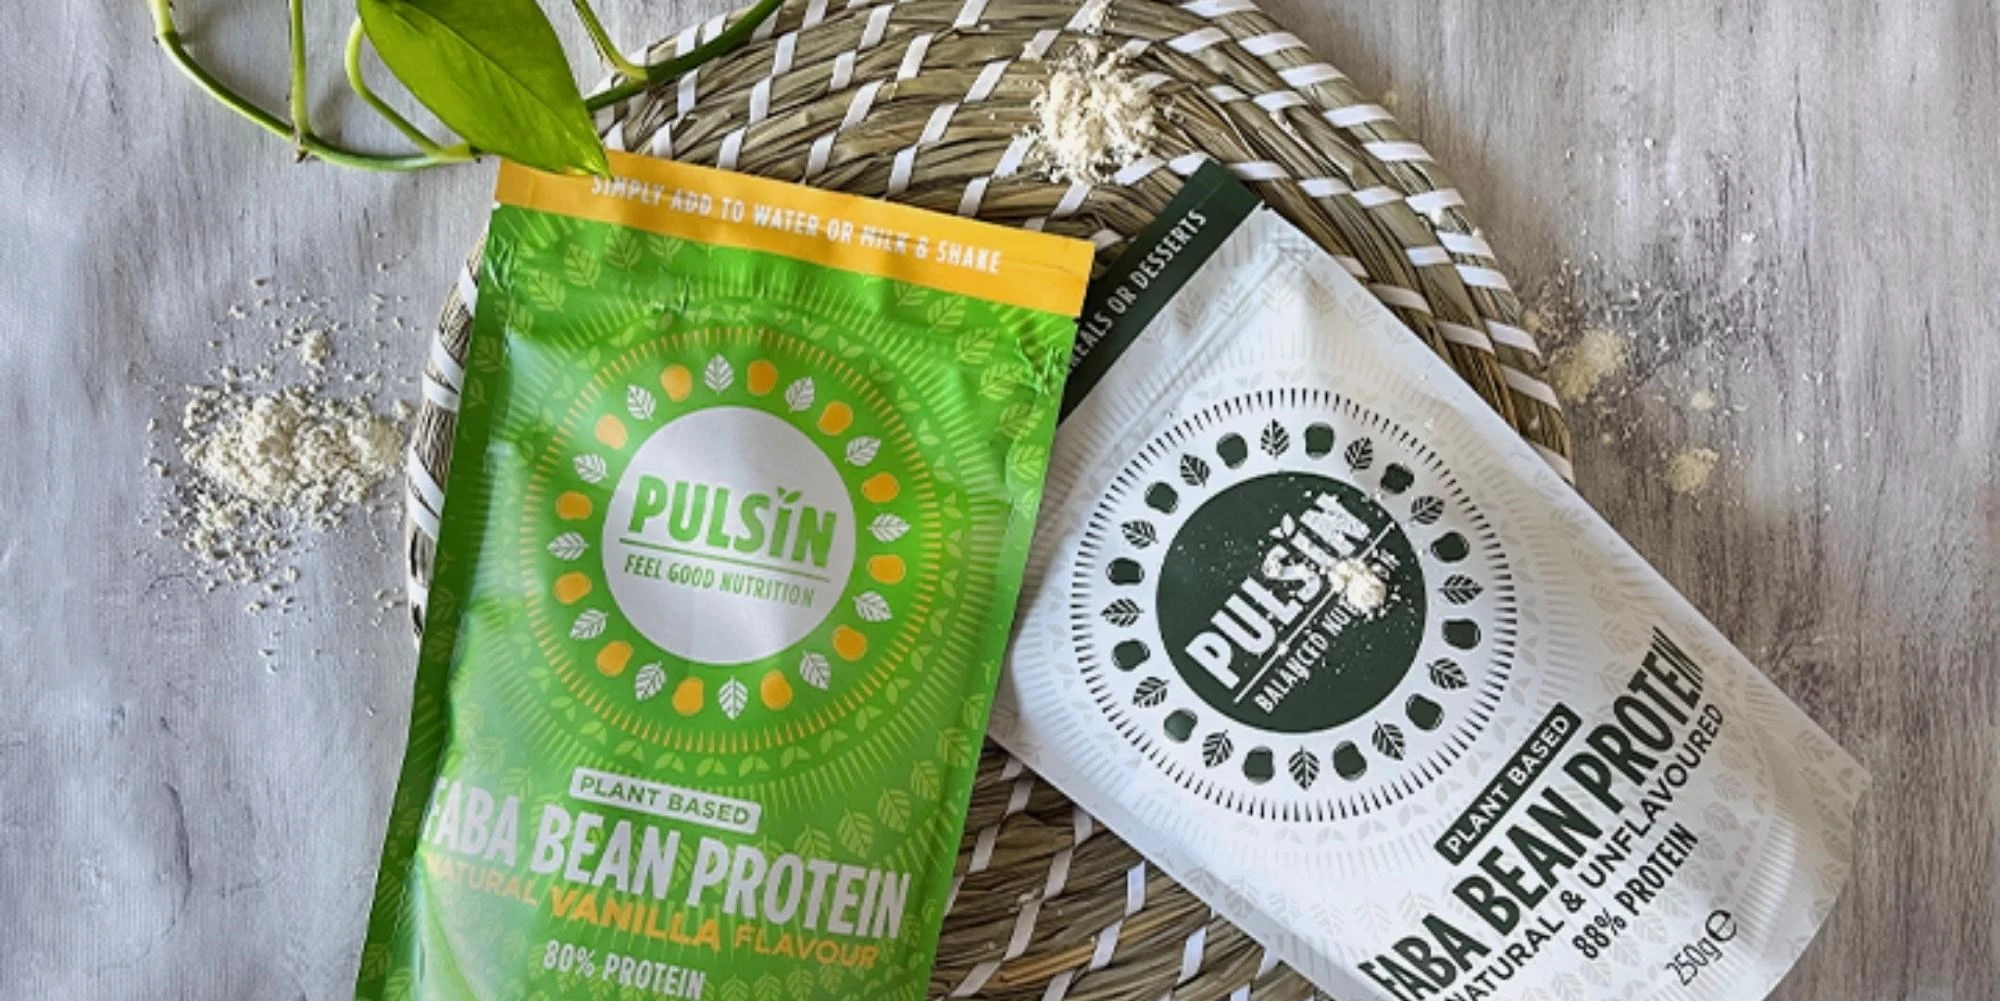 Substituting Whey with Faba bean protein